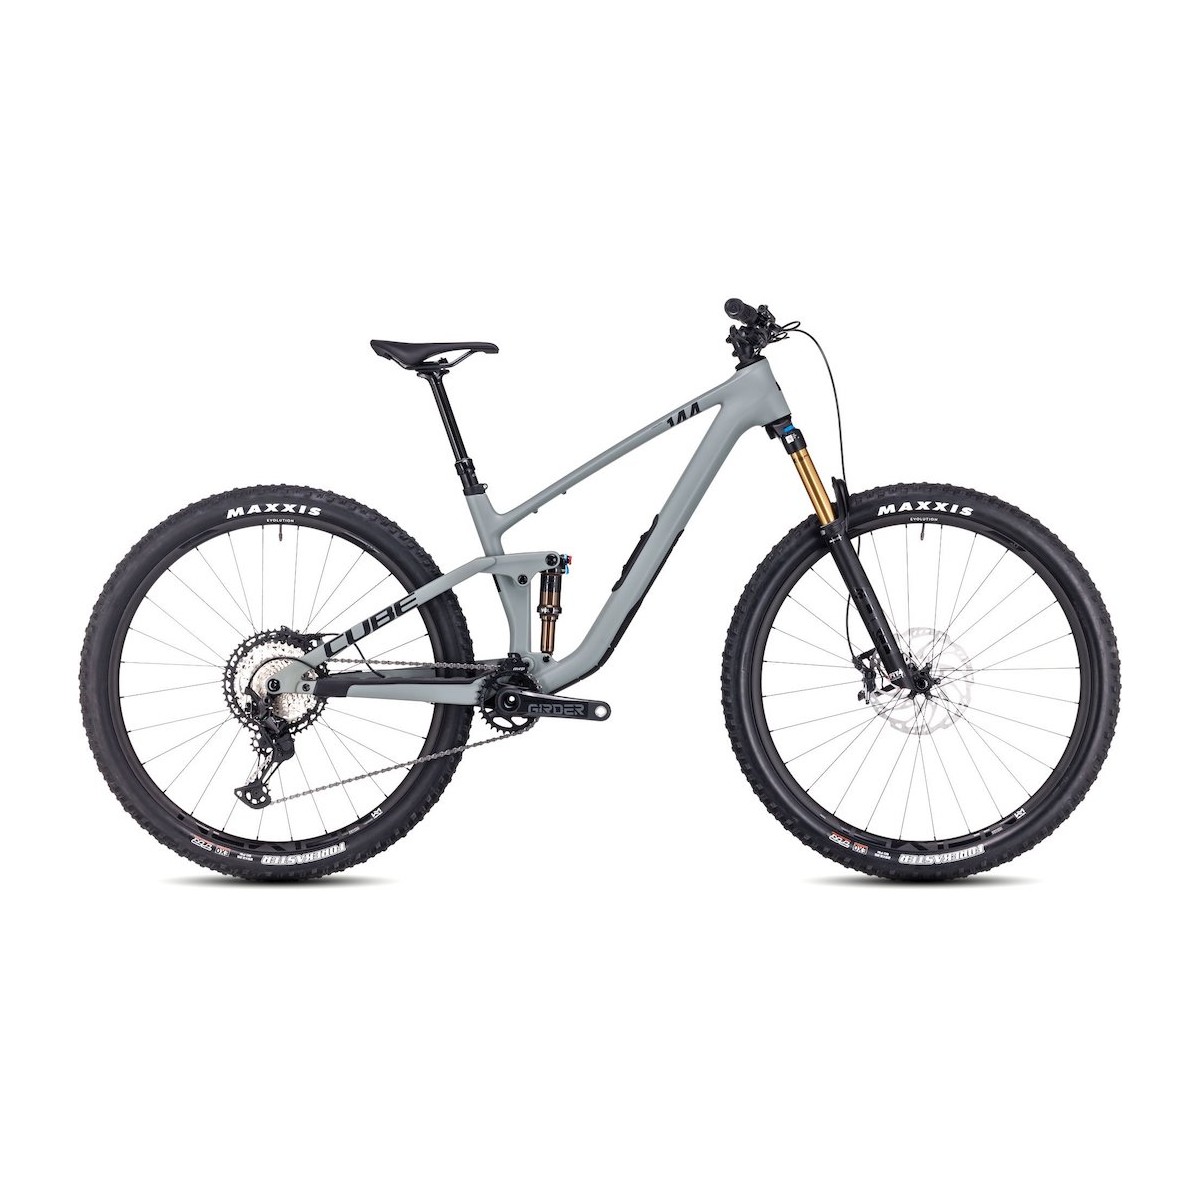 CUBE STEREO ONE44 C:62 RACE full suspension mountainbike - grey 2023